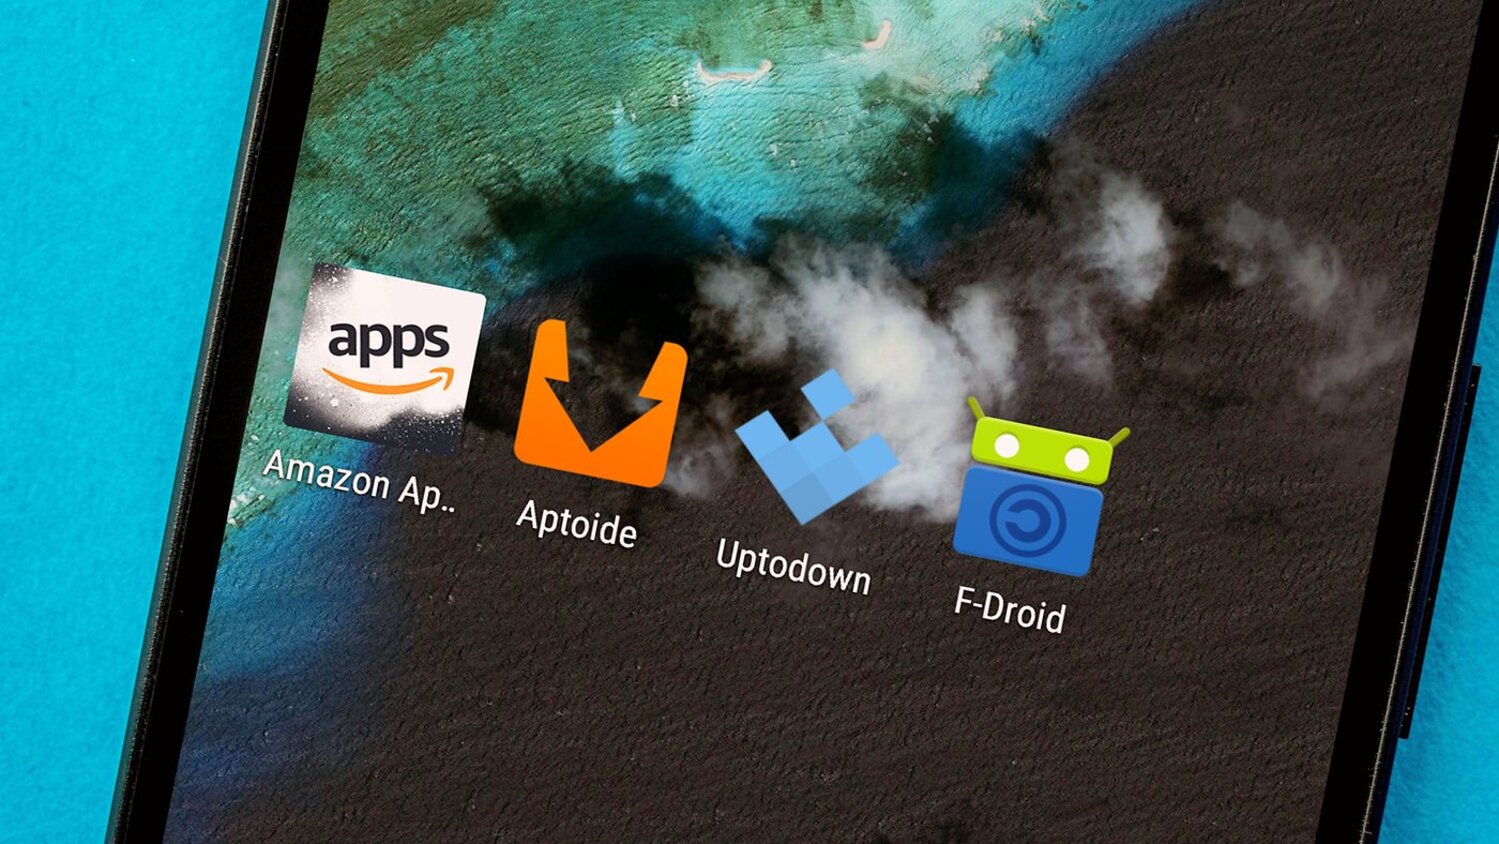 third party apps